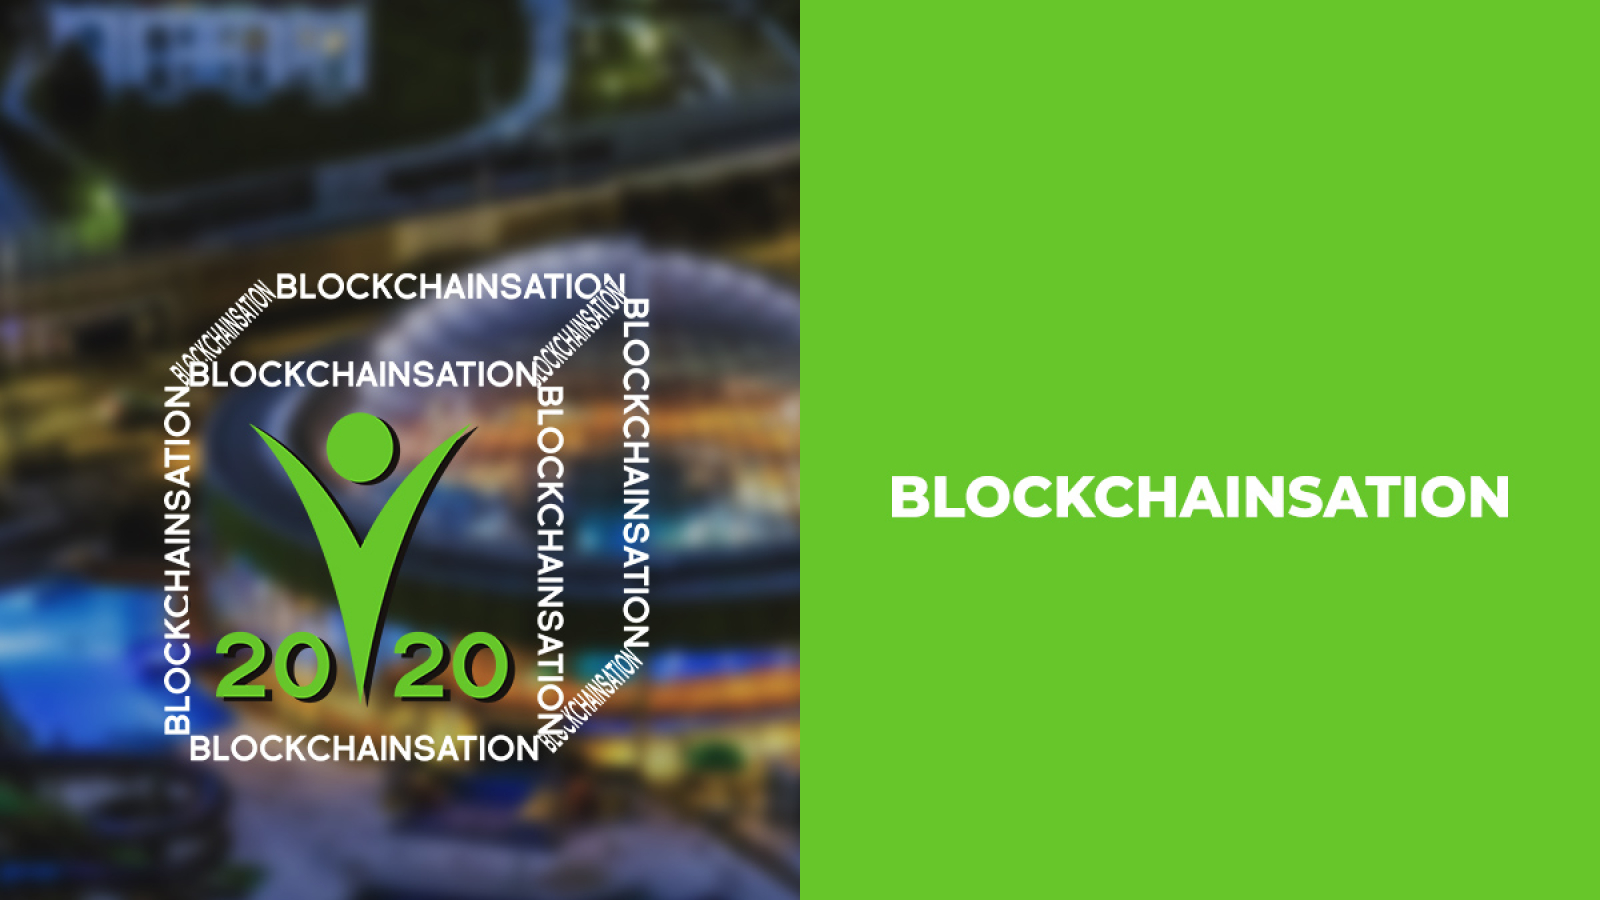 Blockchainsation - Biggest Blockchain and Cryptocurrencies related event in the region